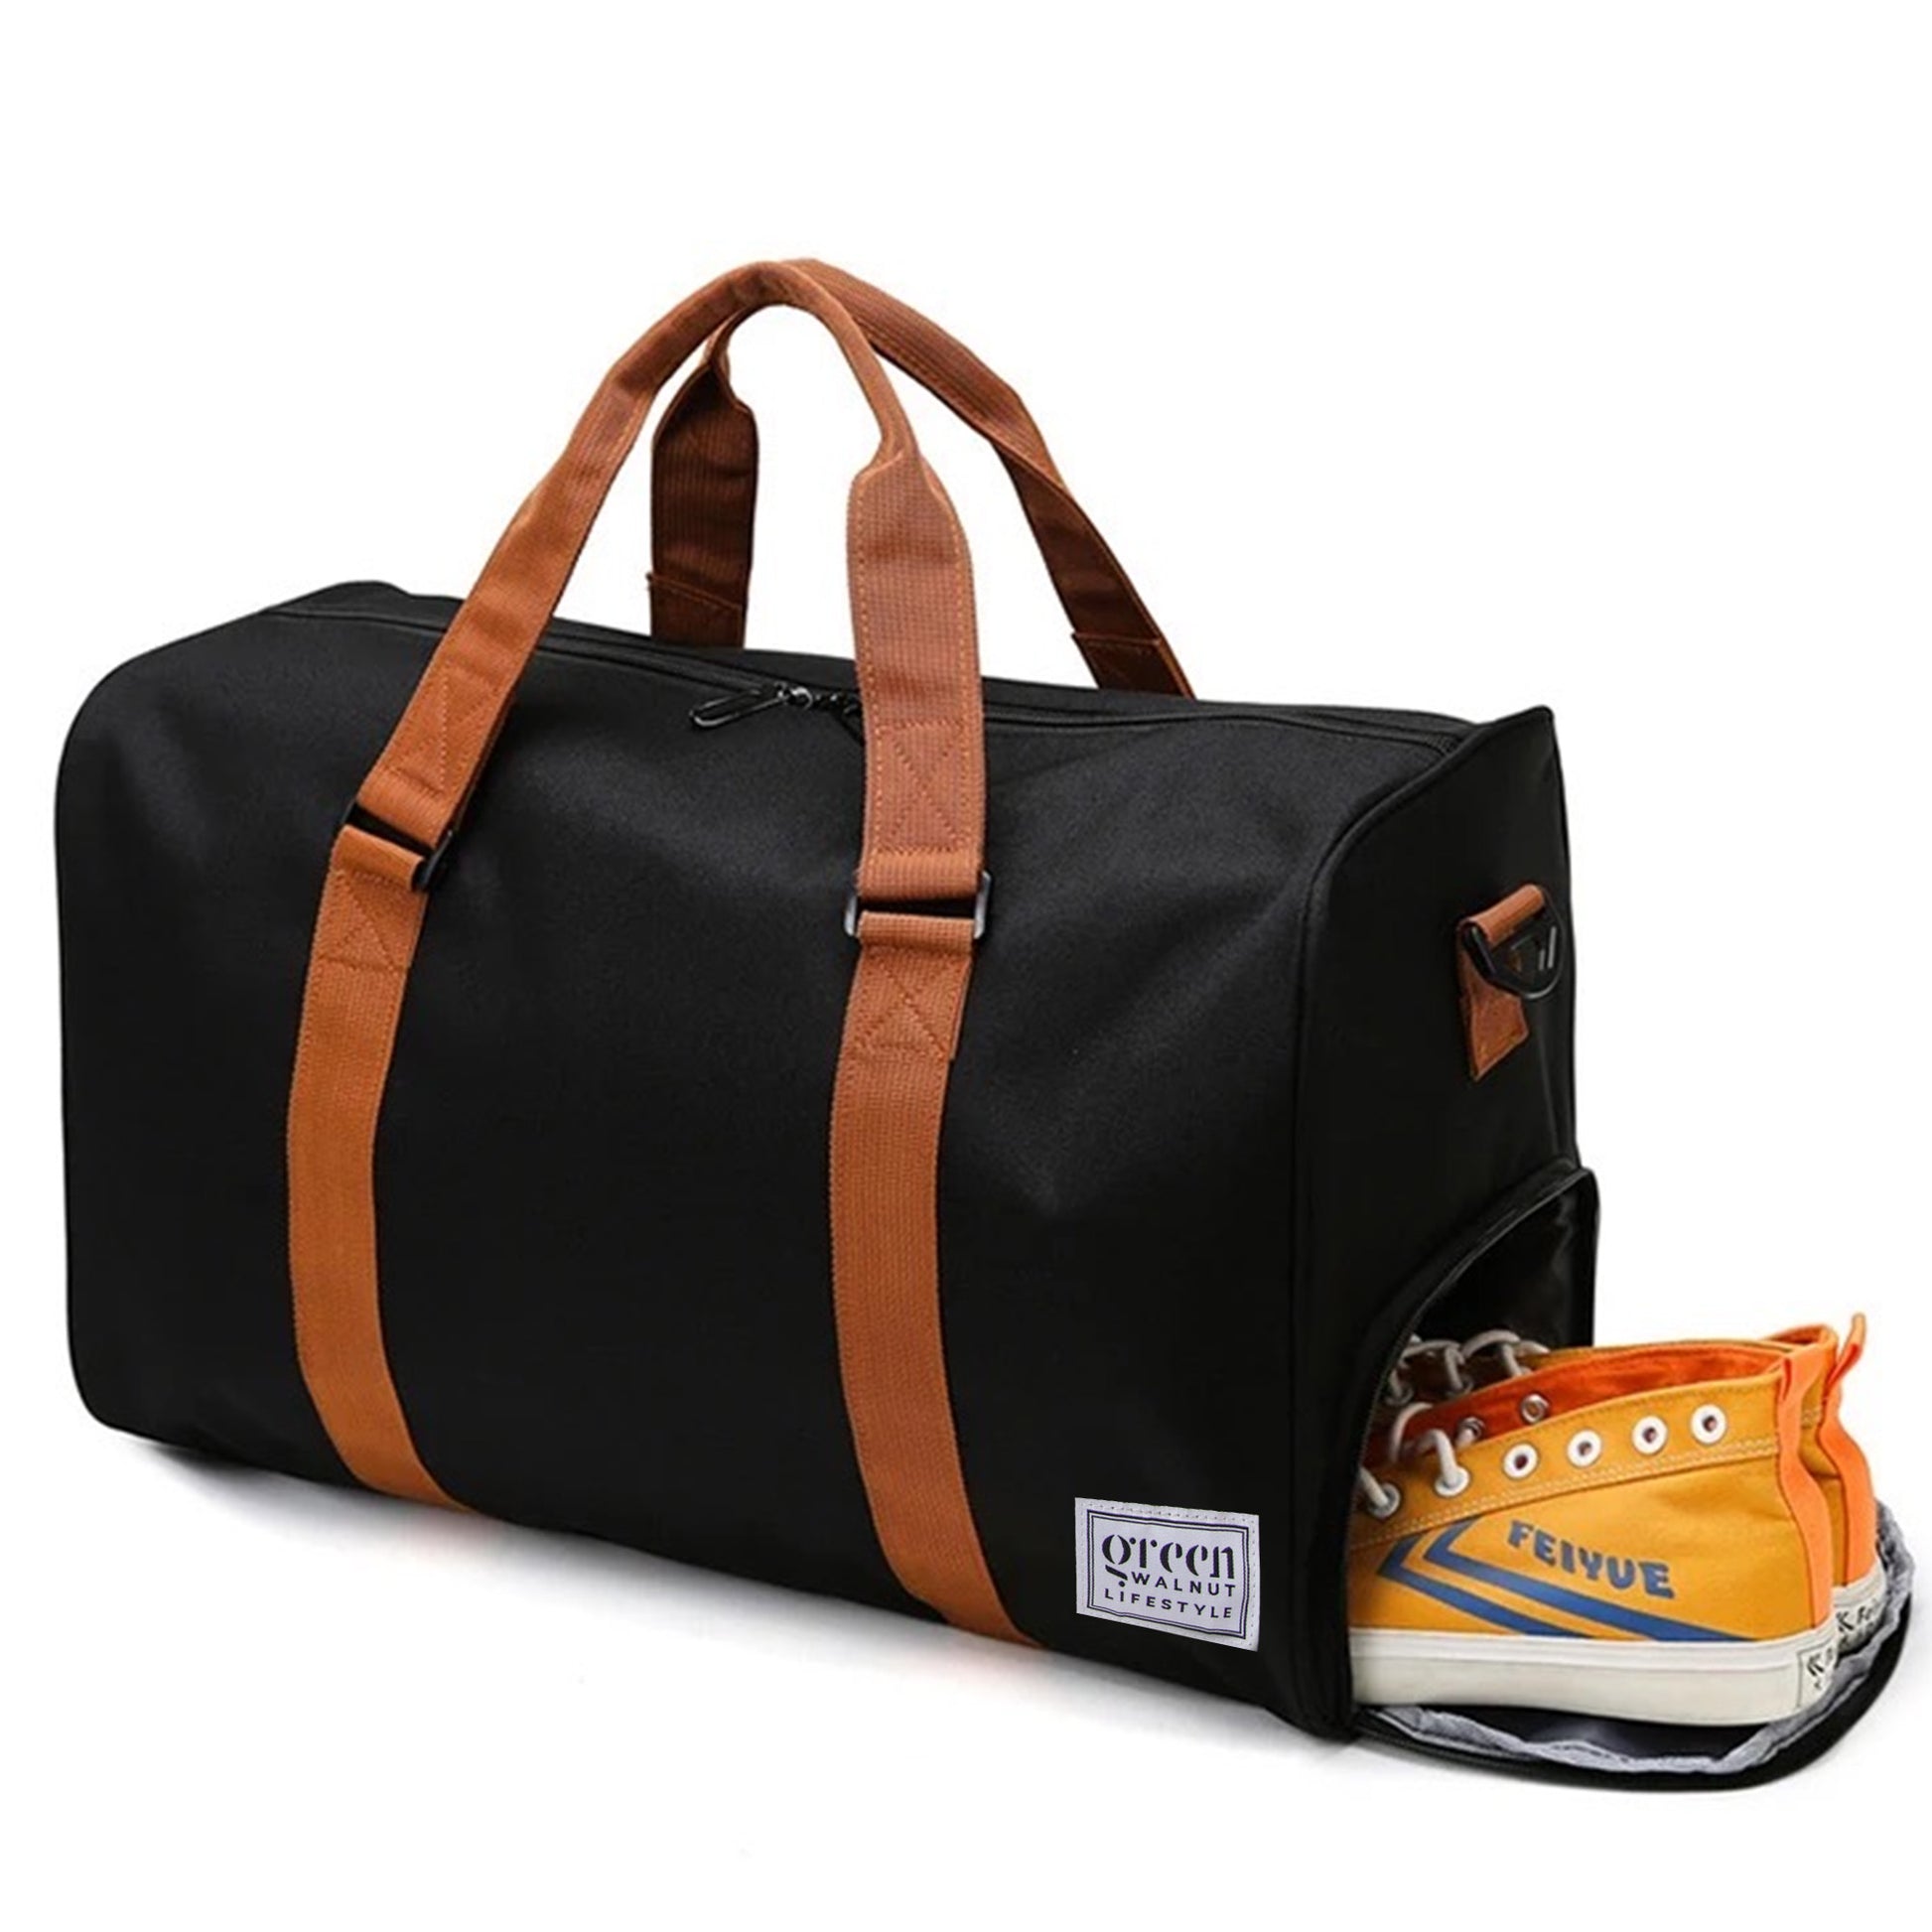 Carry on Bag Travel Duffel bag Sports Gym Bag for Men and Women